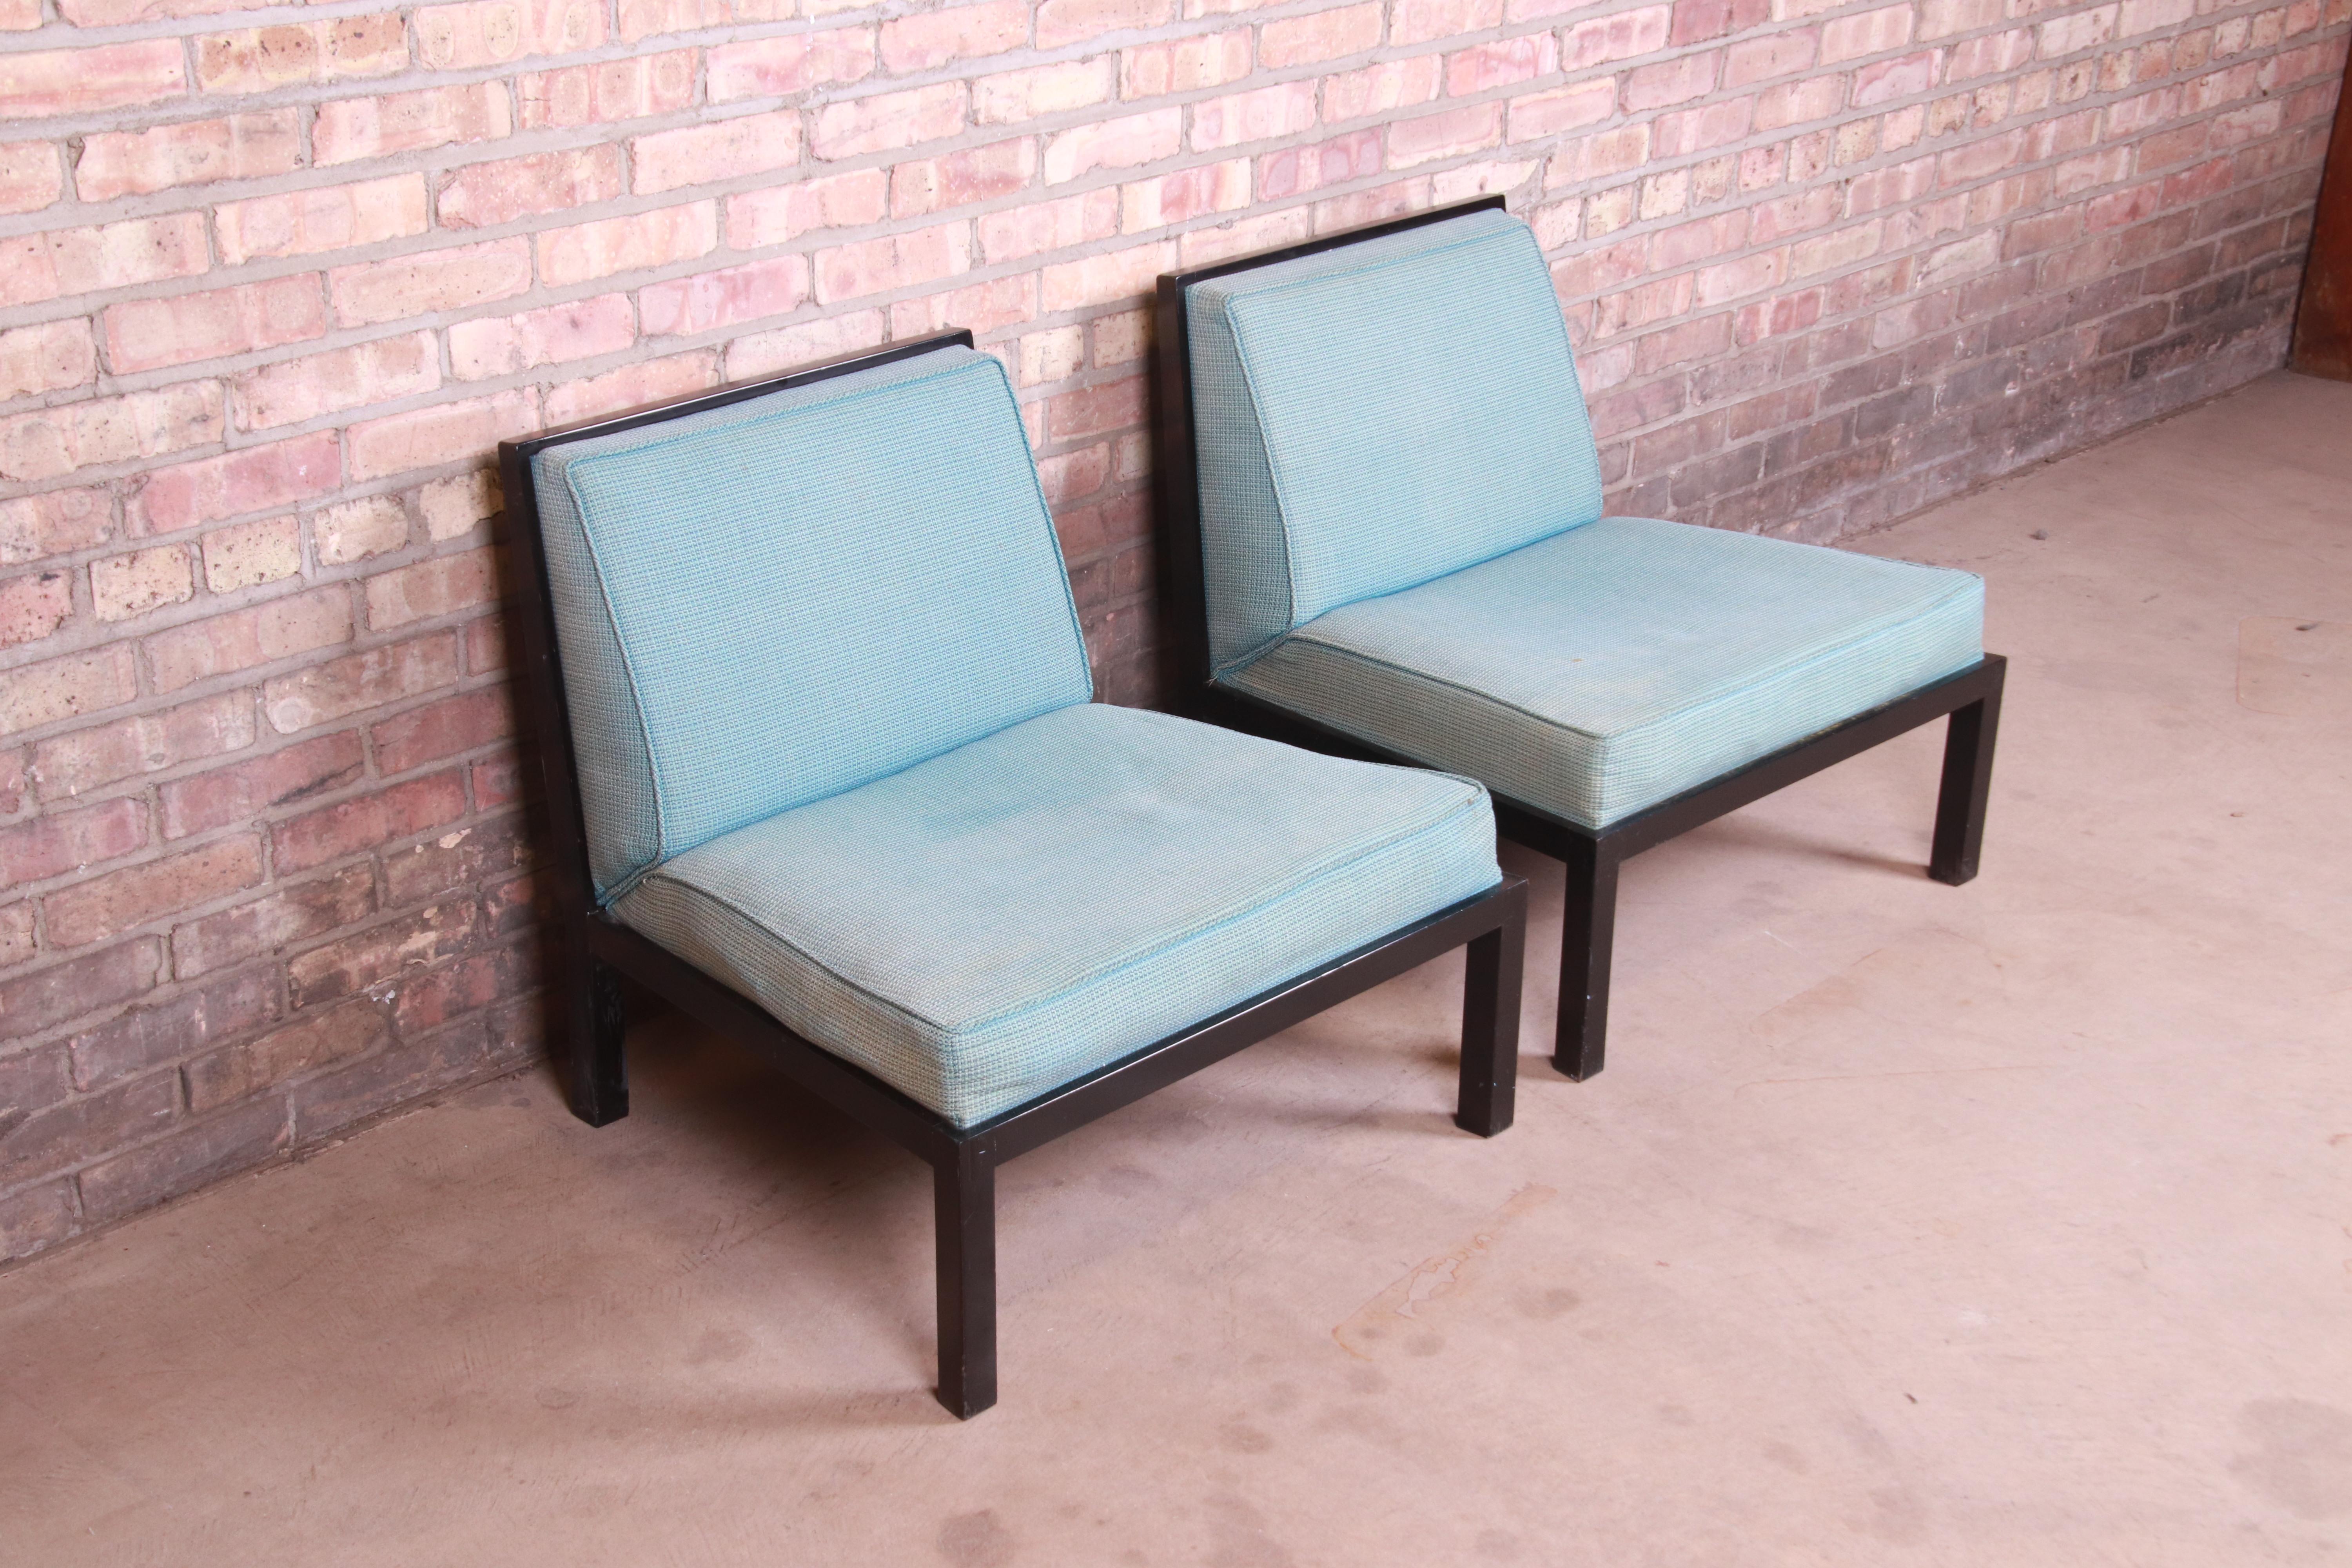 Mid-20th Century Michael Taylor for Baker Furniture Mid-Century Modern Slipper Chairs, Pair